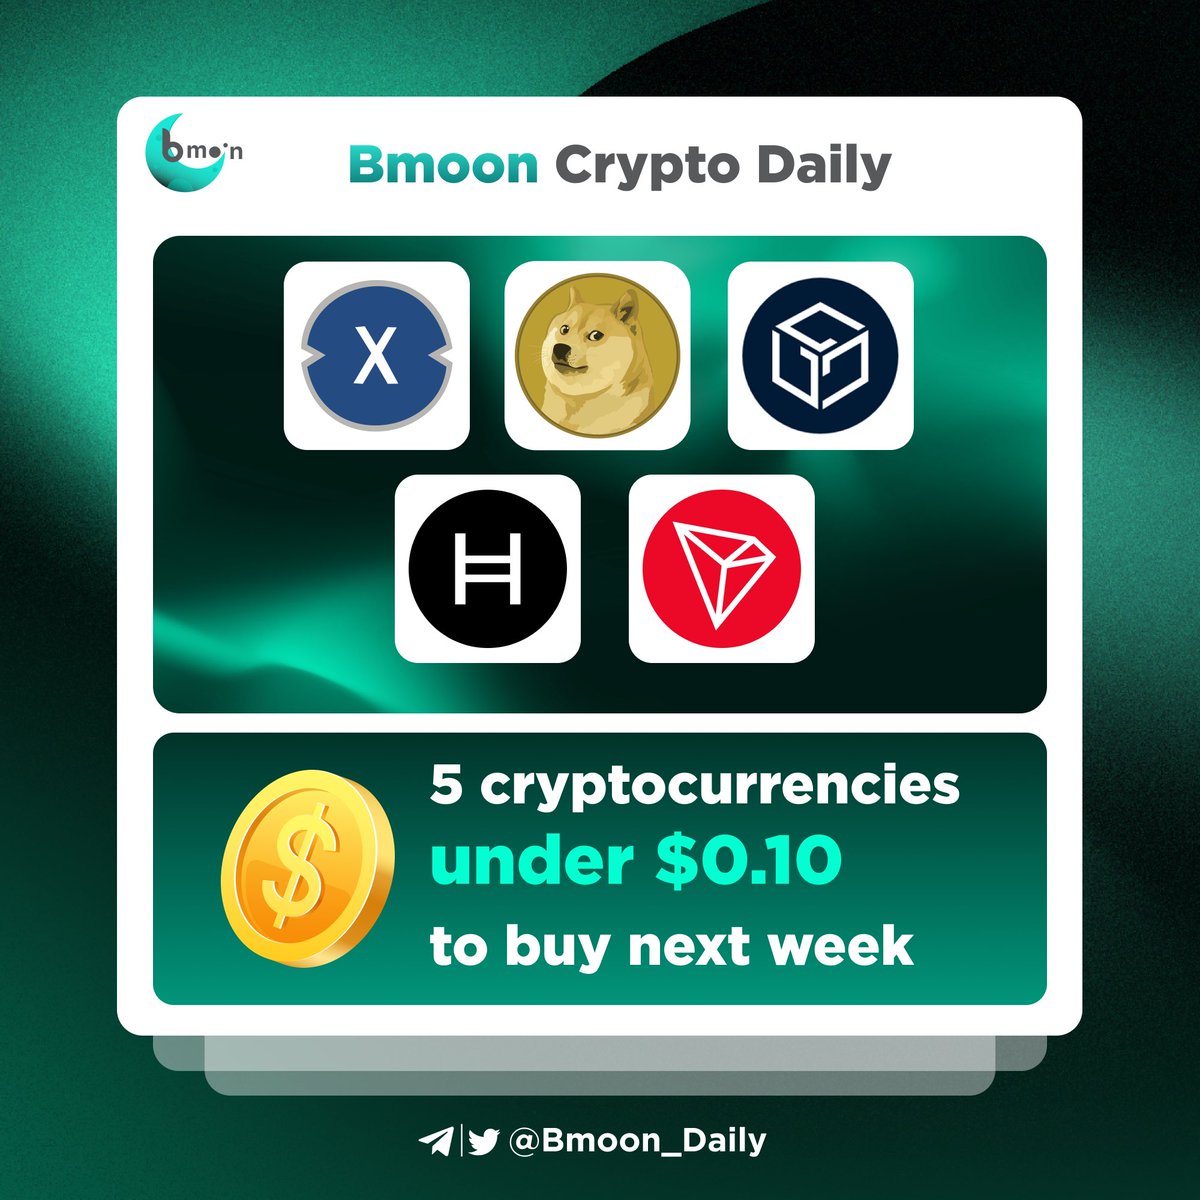 🎯 While the market searches for signs of a sustained rally, #Bmoon has analyzed several cryptocurrencies displaying promising investment potential 🔥 5 cryptocurrencies under $0.10 to buy next week 🚀🚀 @XinFin_Official @dogecoin @GoGalaGames @hedera @trondao